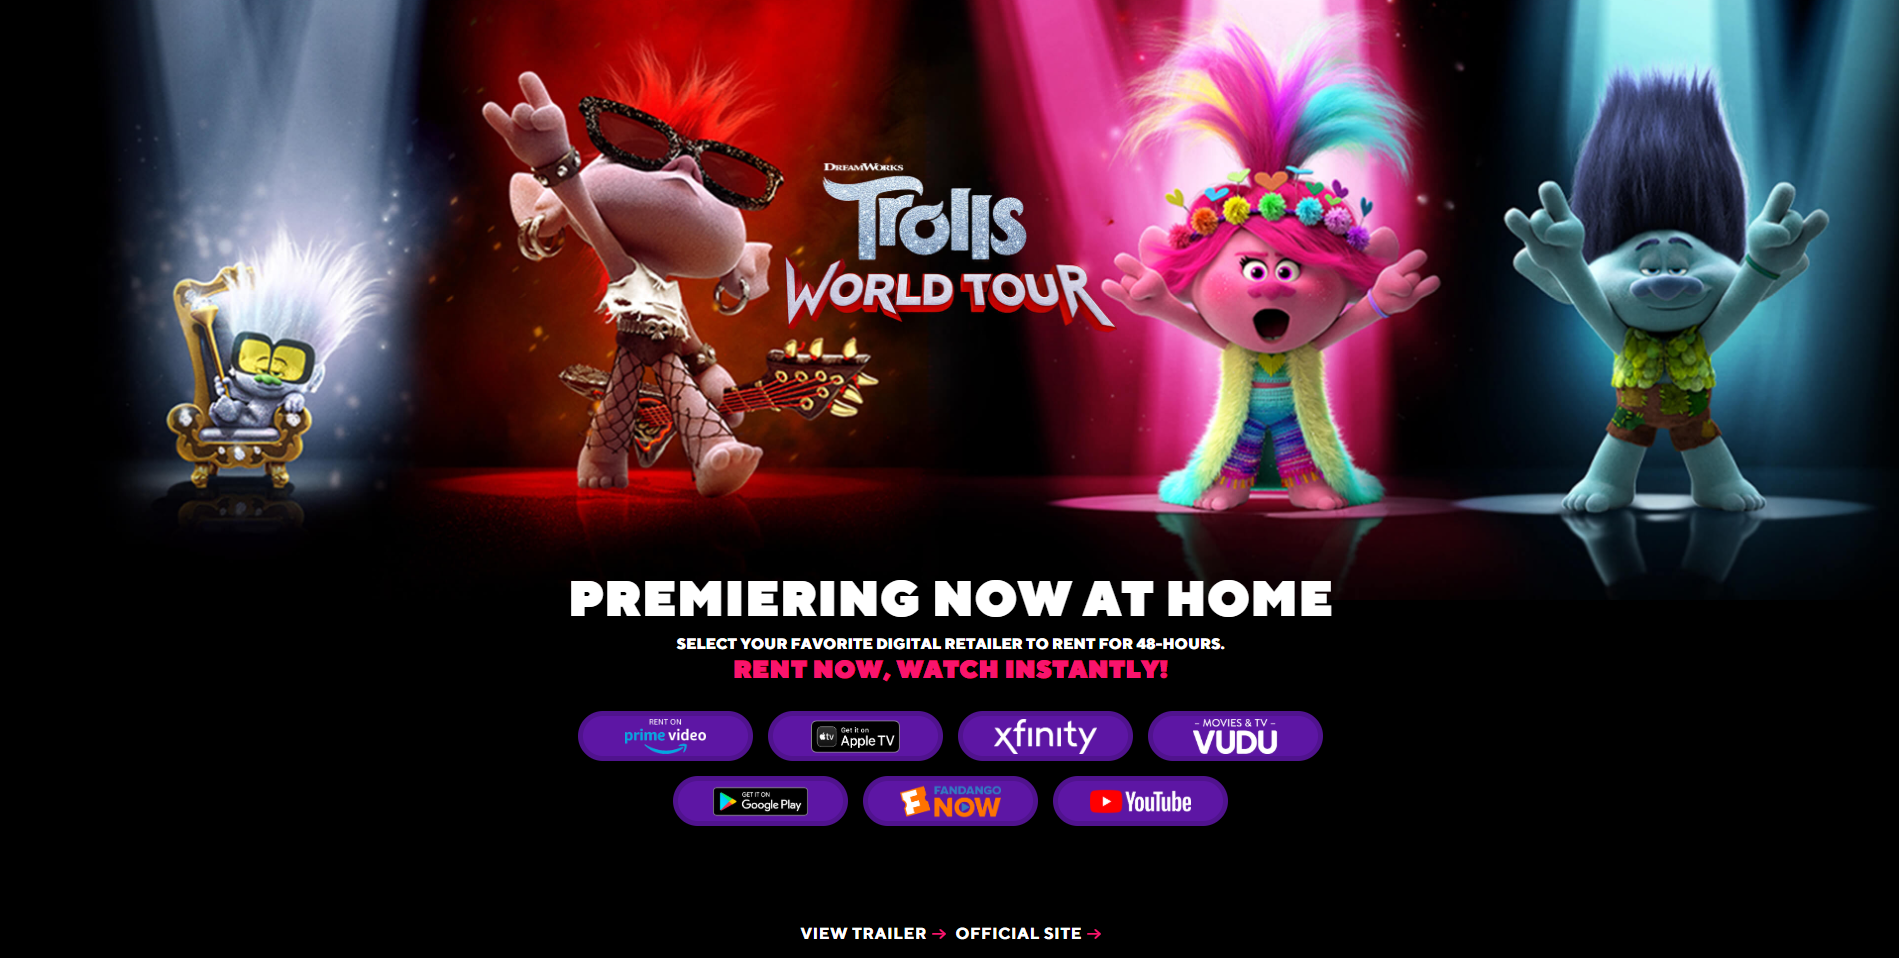 Trolls World Tour breaks digital records, charts a path for Hollywood Fox Business